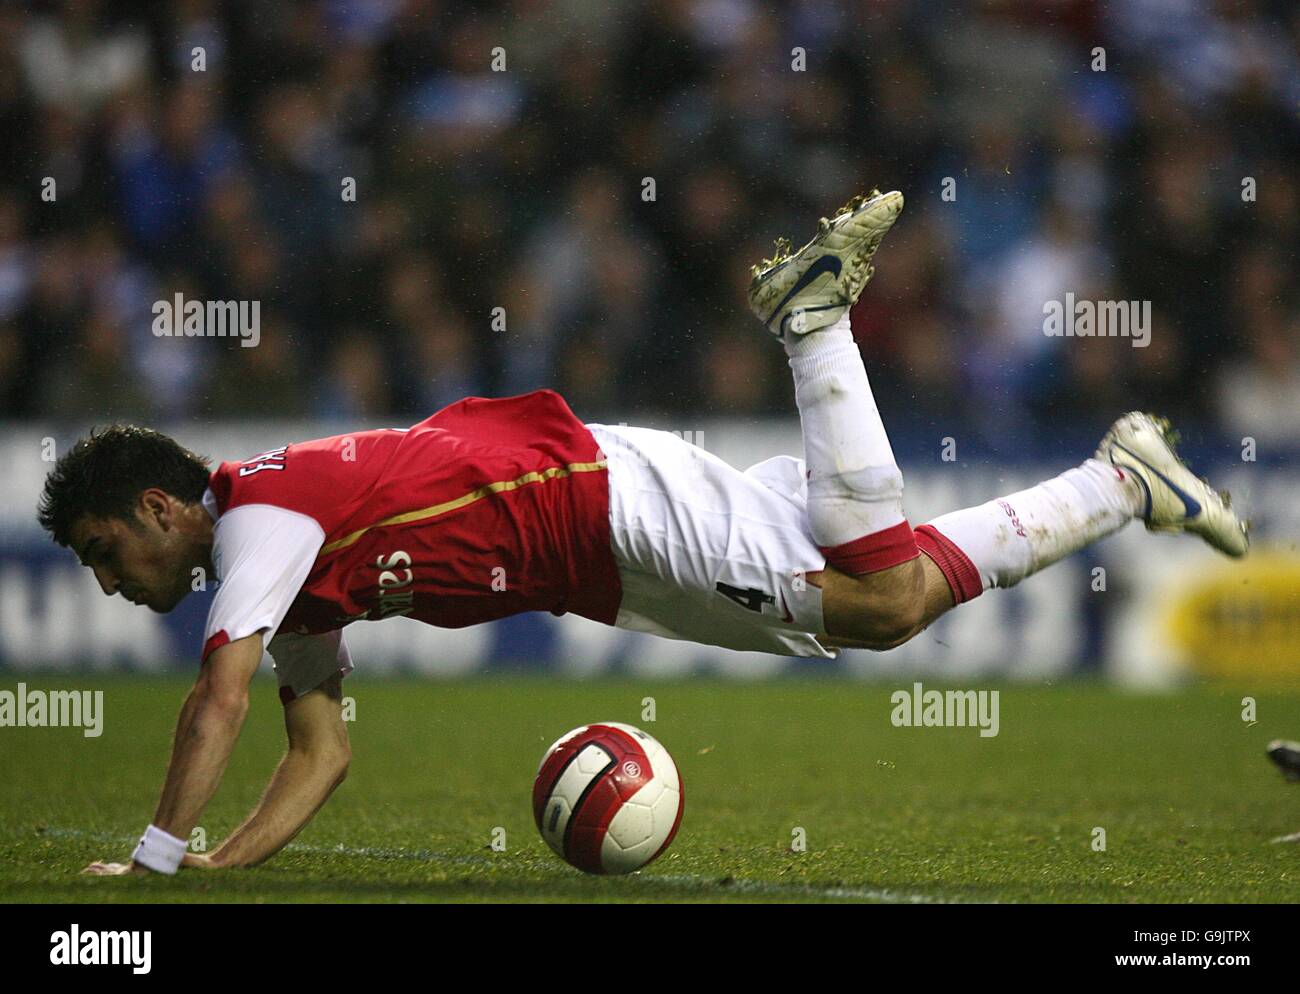 Arsenal's Francesc Fabregas is brought down by Reading goalkeeper Marcus Hahnemann (out of picture) Stock Photo